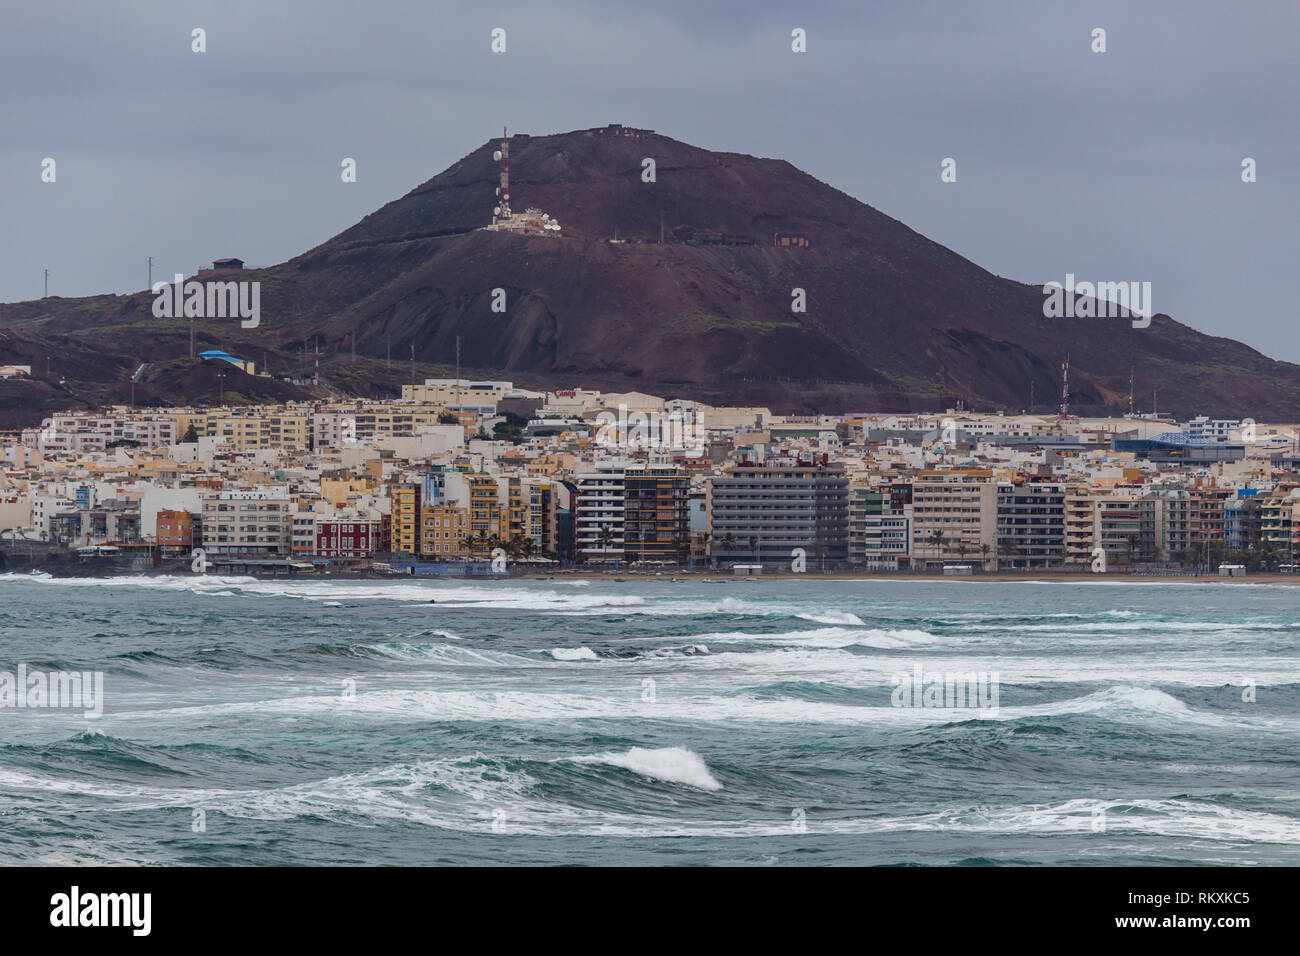 Las Palmas, Spain - February 2, 2019: Stormy weather at Palmas de Gran  Canaria and La Isleta hill in the background Stock Photo - Alamy